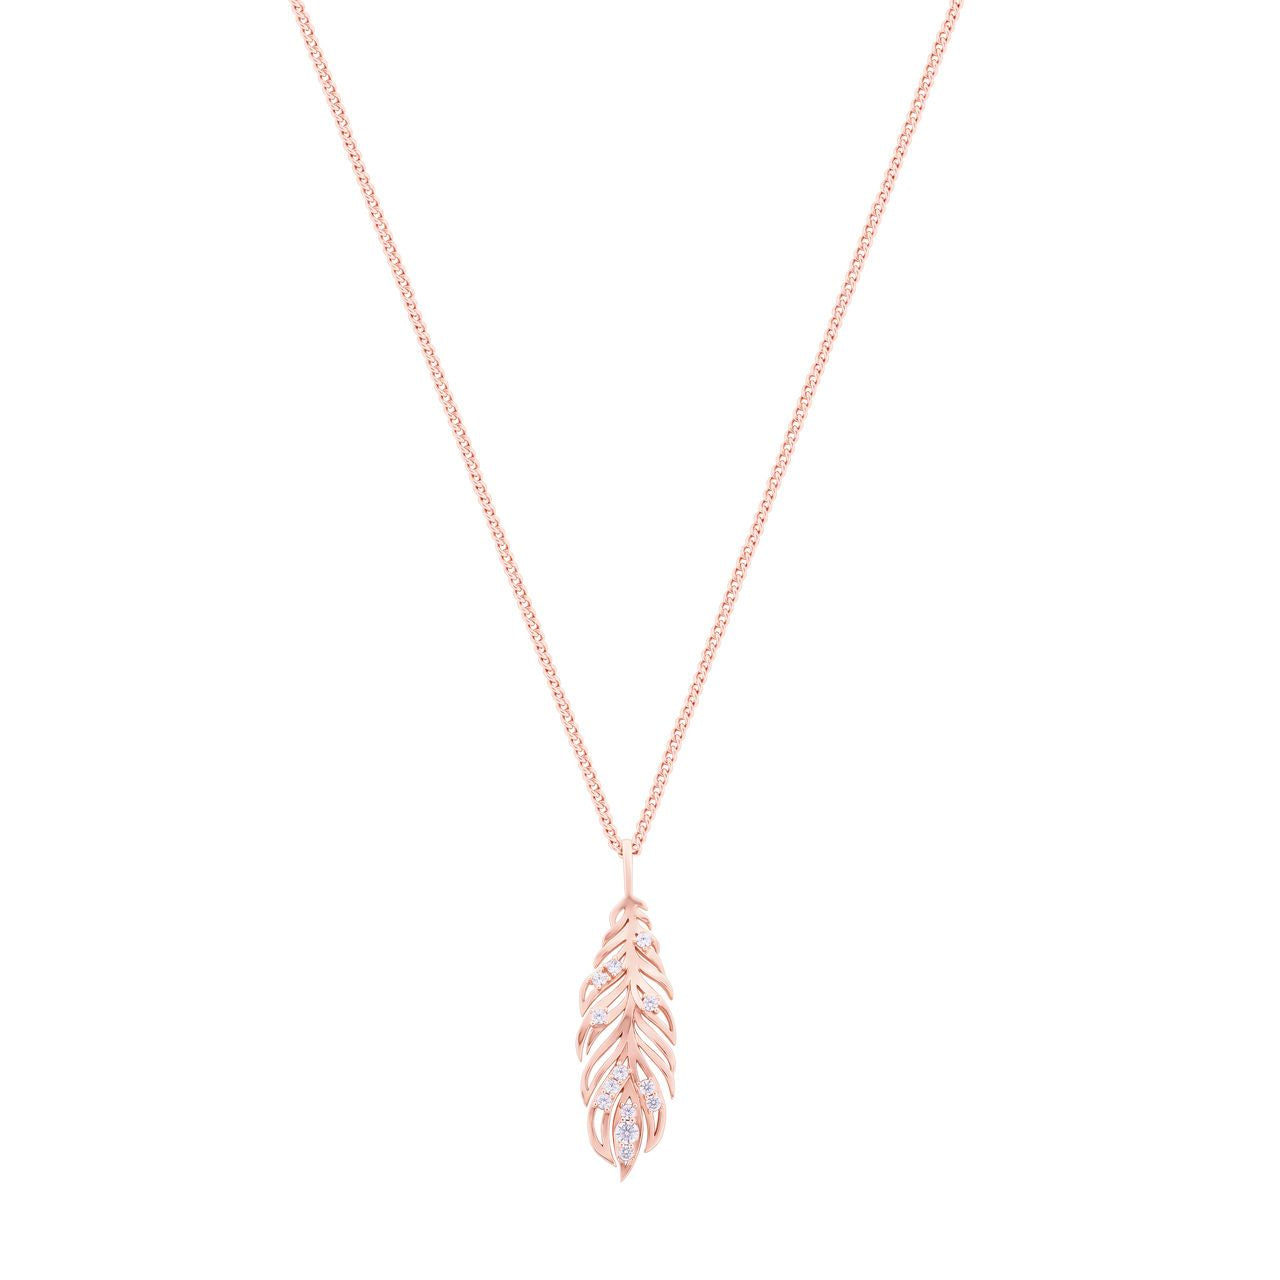 Long Feather Rose Gold Pendant With Clear CZ by Tipperary  This Rose Gold crafted Feather Pendant is embelleshed with Crystals along the Feathers and is a truly unique and special piece. This pendant is finished with a brightly polished bale and suspends freely at a tilt along a cable chain which secures with a lobster claw clasp with 2 extension and a Tipperary branded fob.